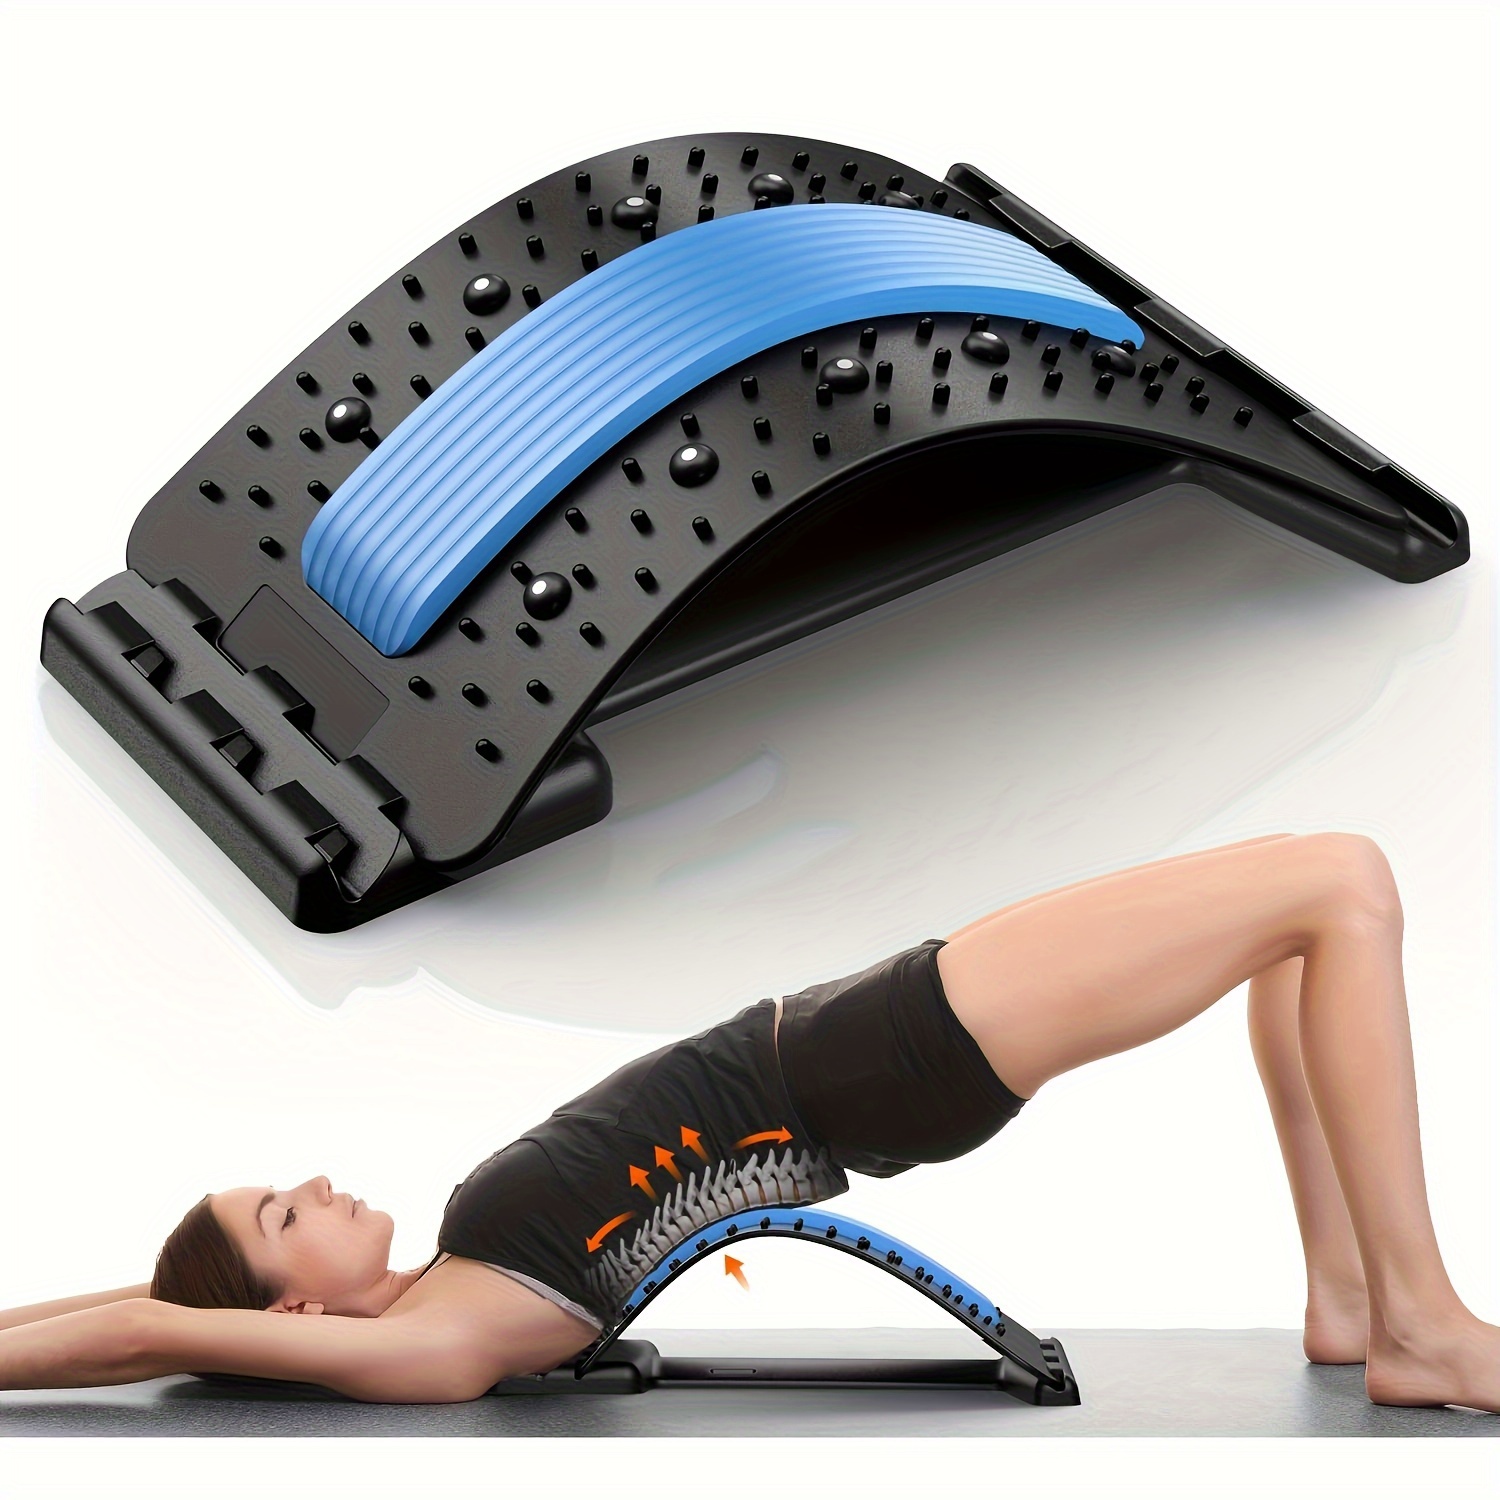 Back Stretcher Pillow For Back Pain Relief,Lumbar Support,Herniated  Disc,Sciatica Pain Relief,Posture Corrector,Spinal Stenosis